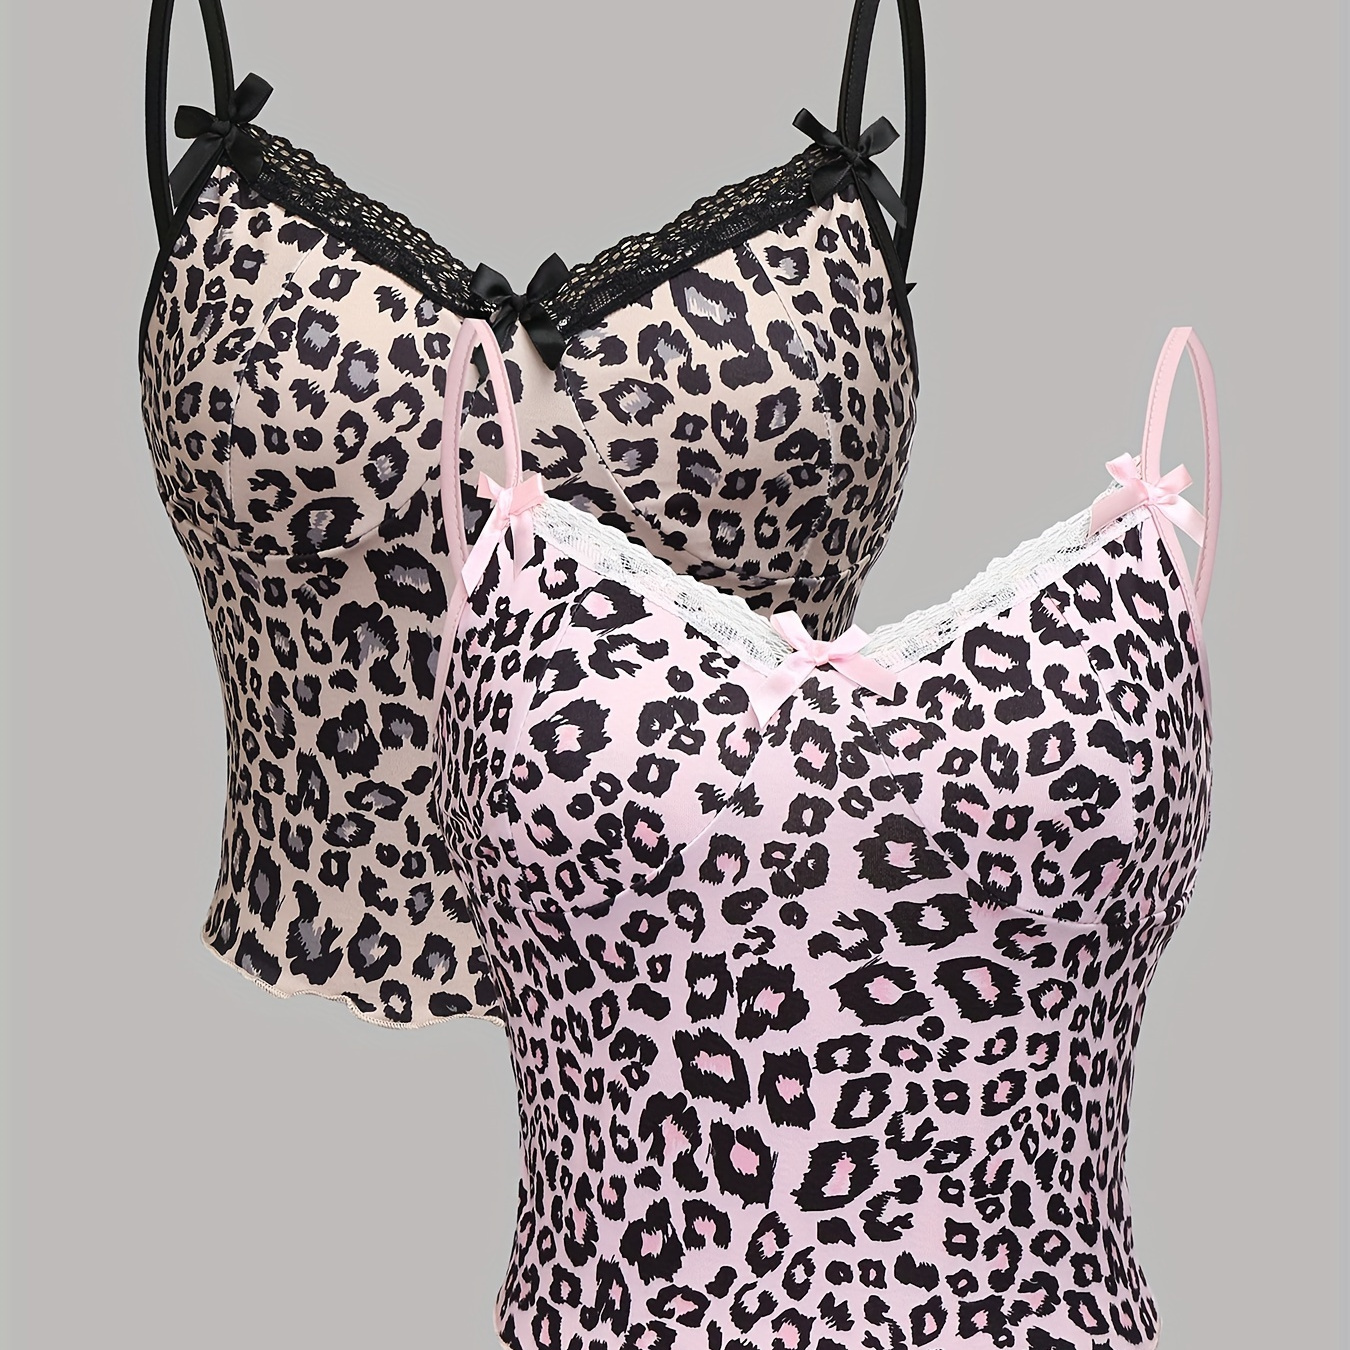 

2 Pack Leopard Print Contrast Lace Cami Tops, Cute Sleeveless Spaghetti Strap Bowknot Detail Slim Tops, Women's Clothing